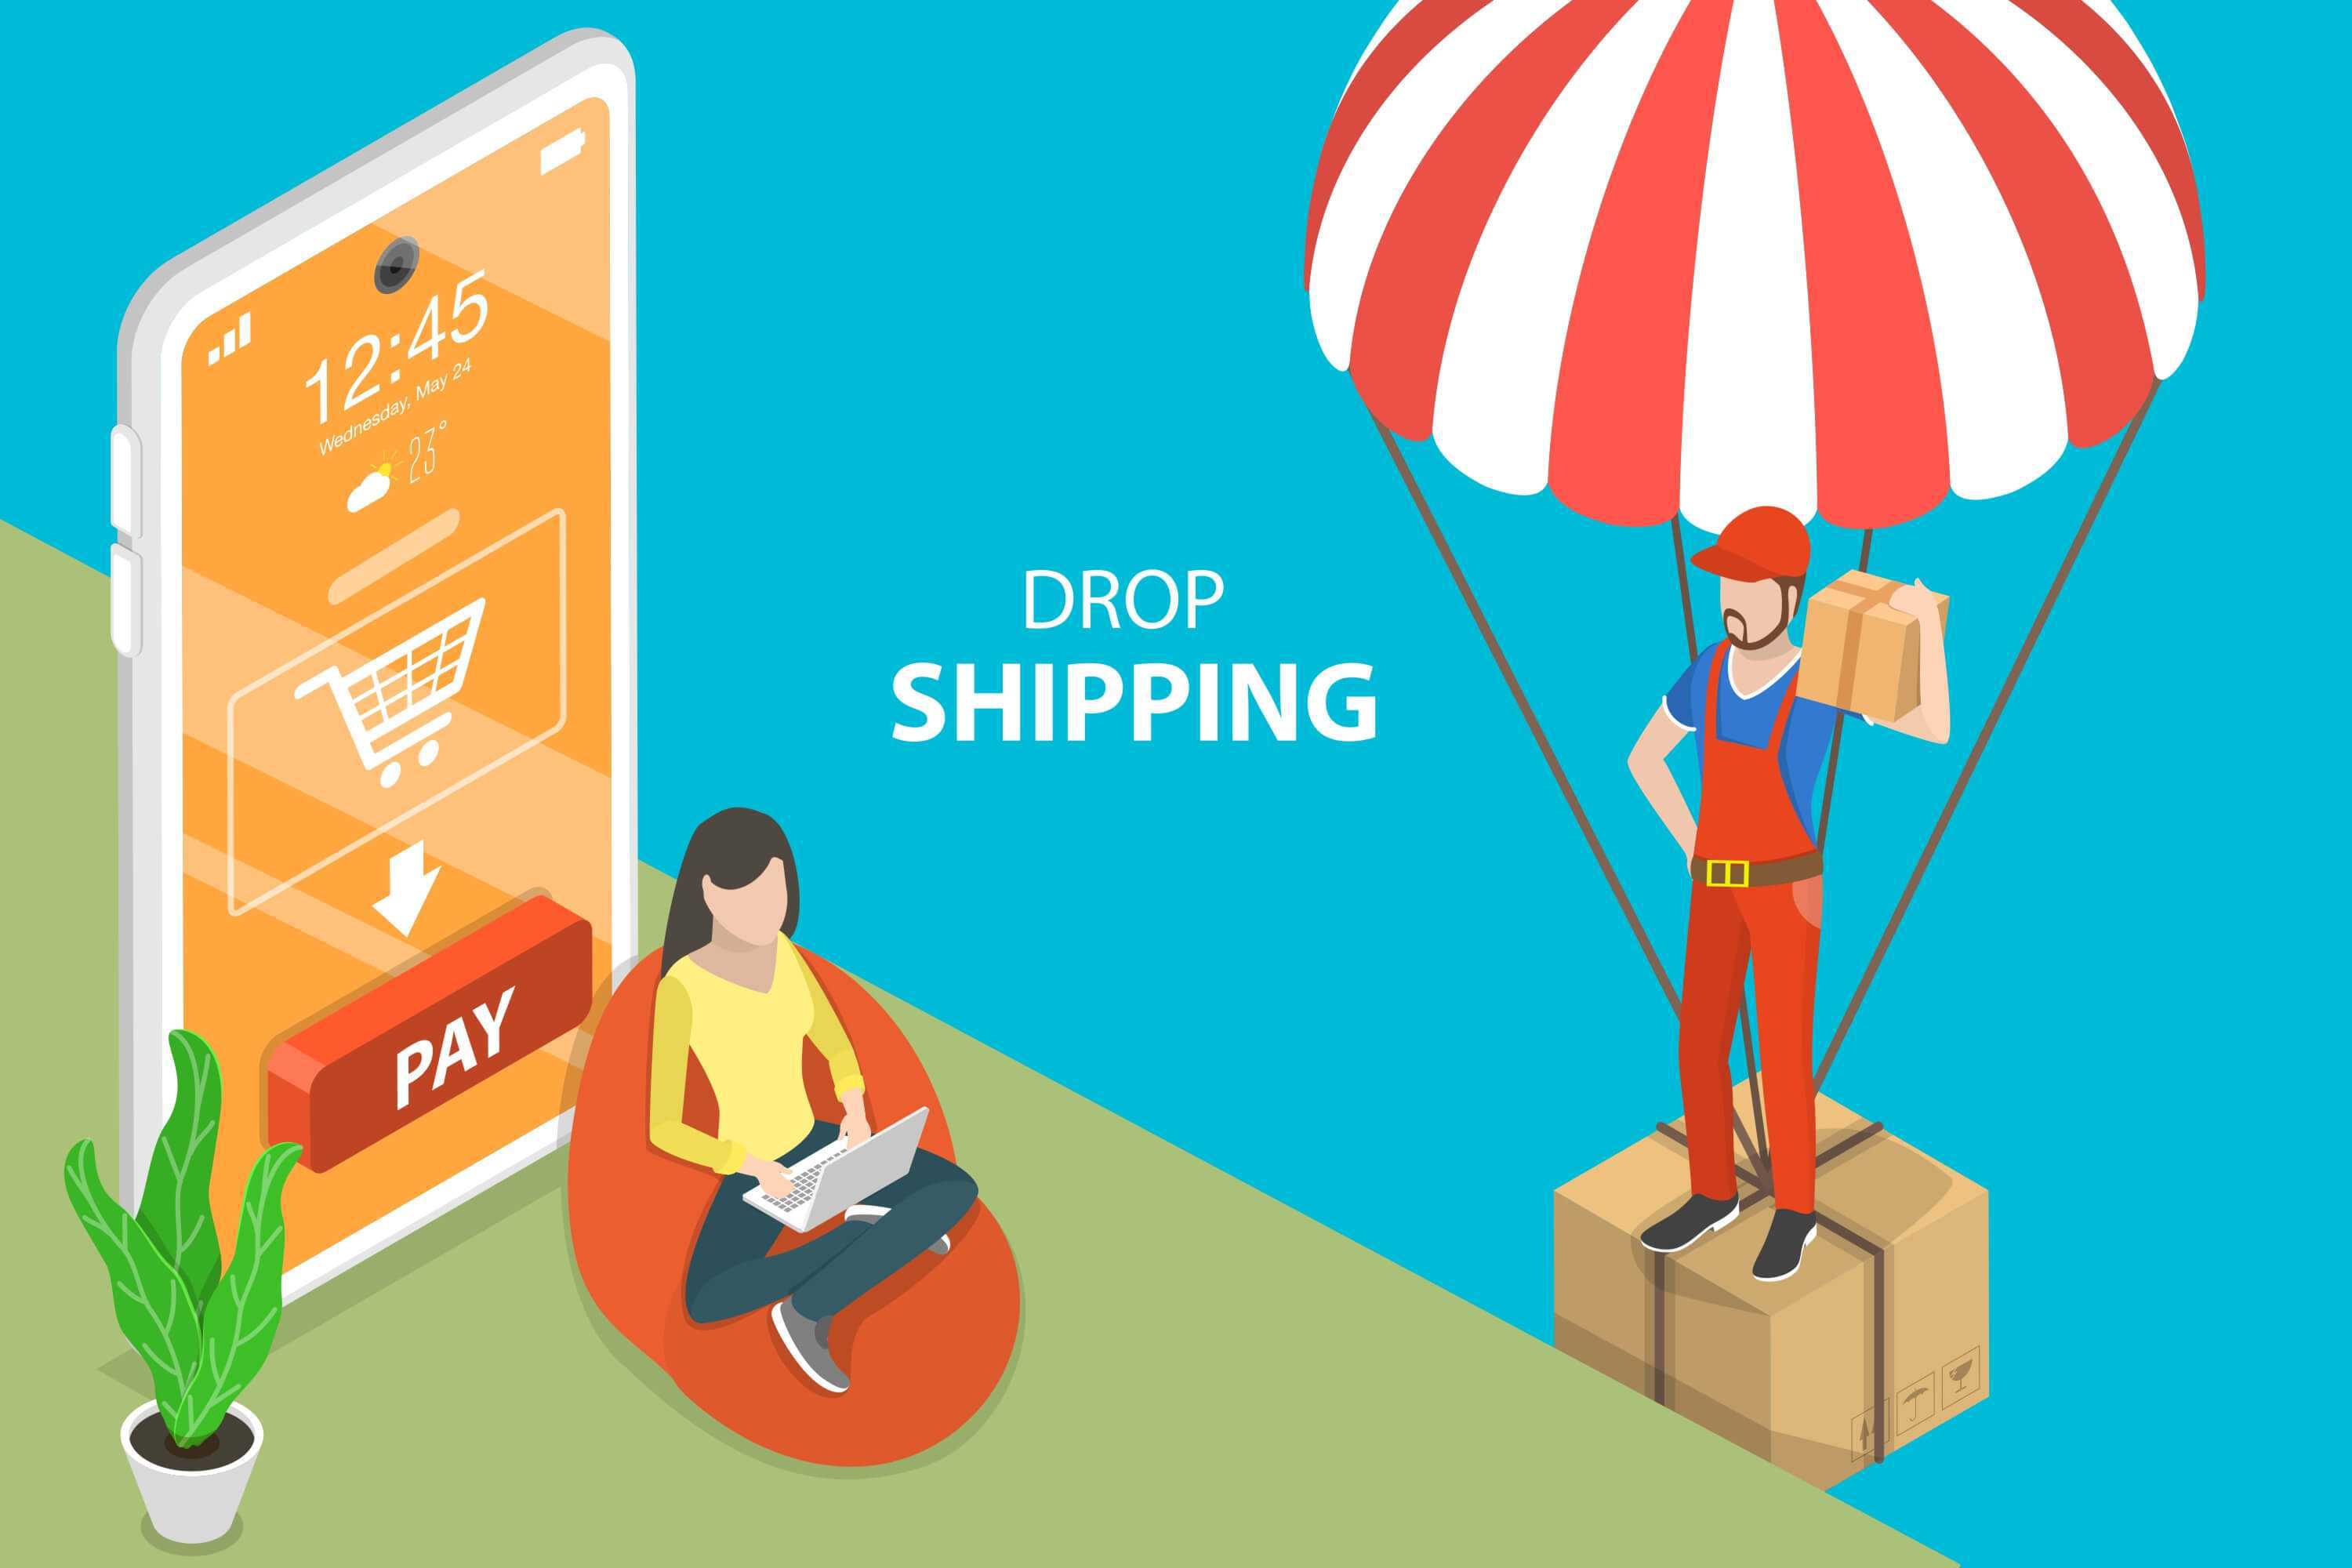 How to Create a Dropshipping Website